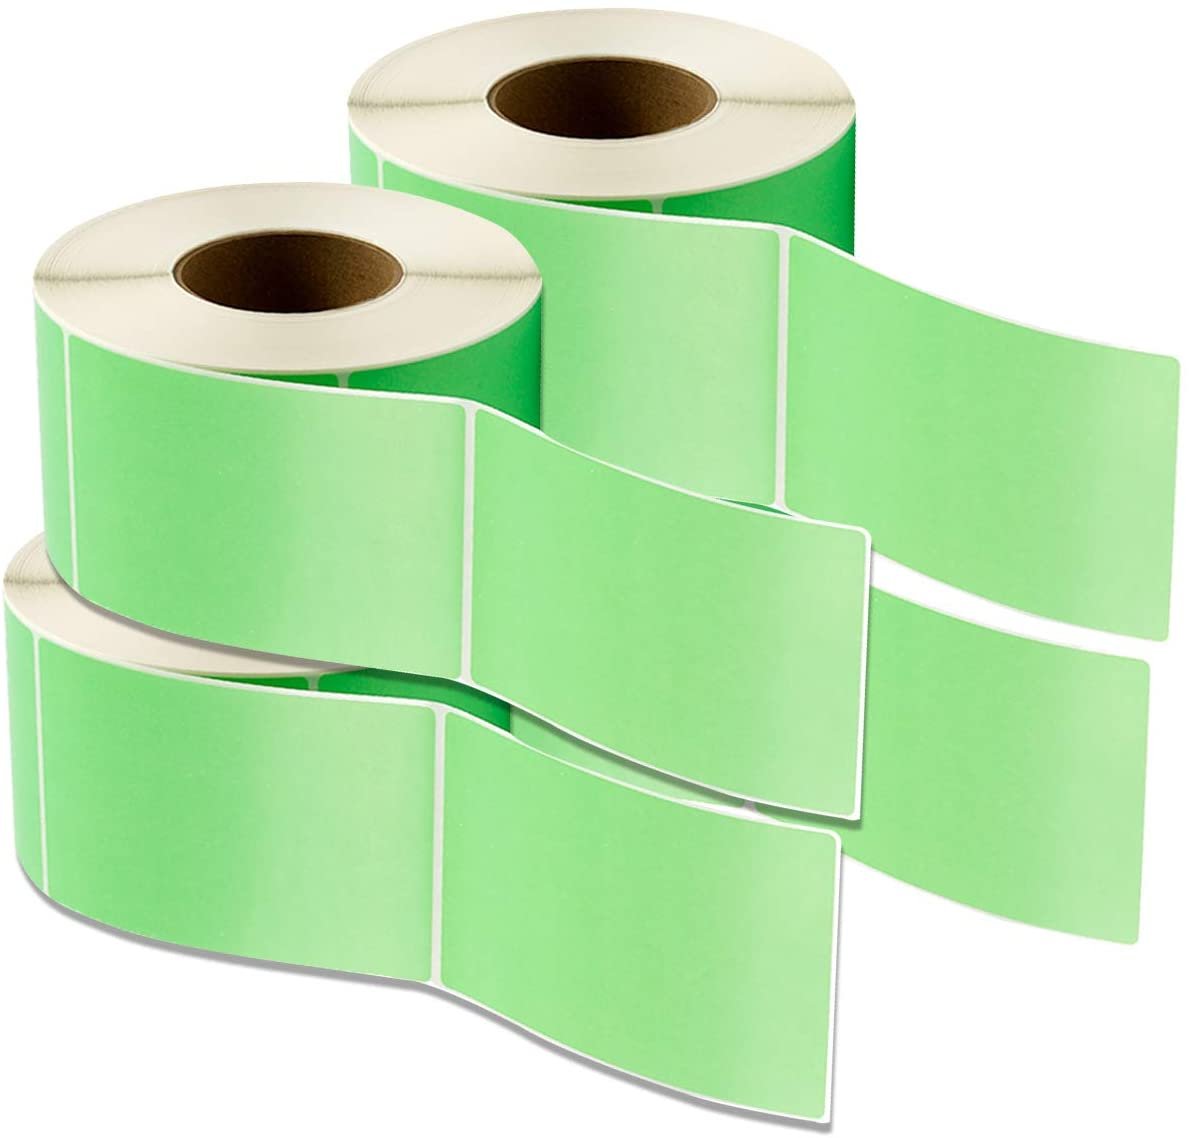 4" x 6" Green Thermal Transfer Color Labels Required  Ribbon 1000/rl Cs 4 Rls 